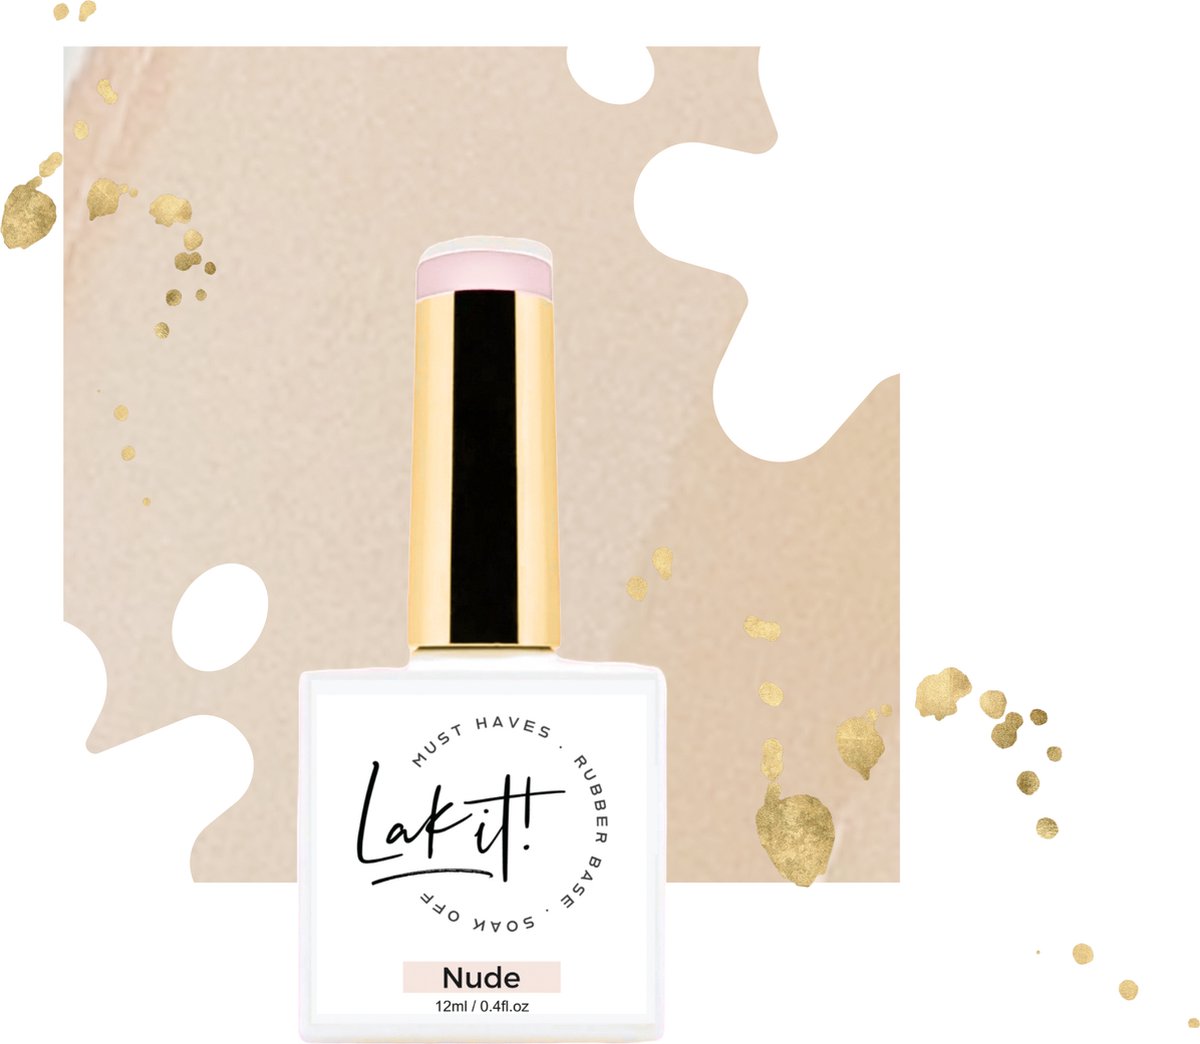 LAK-IT! rubber base - Nude - rose nude base - soak off - uv/led - vegan en cruelty free - must have collection